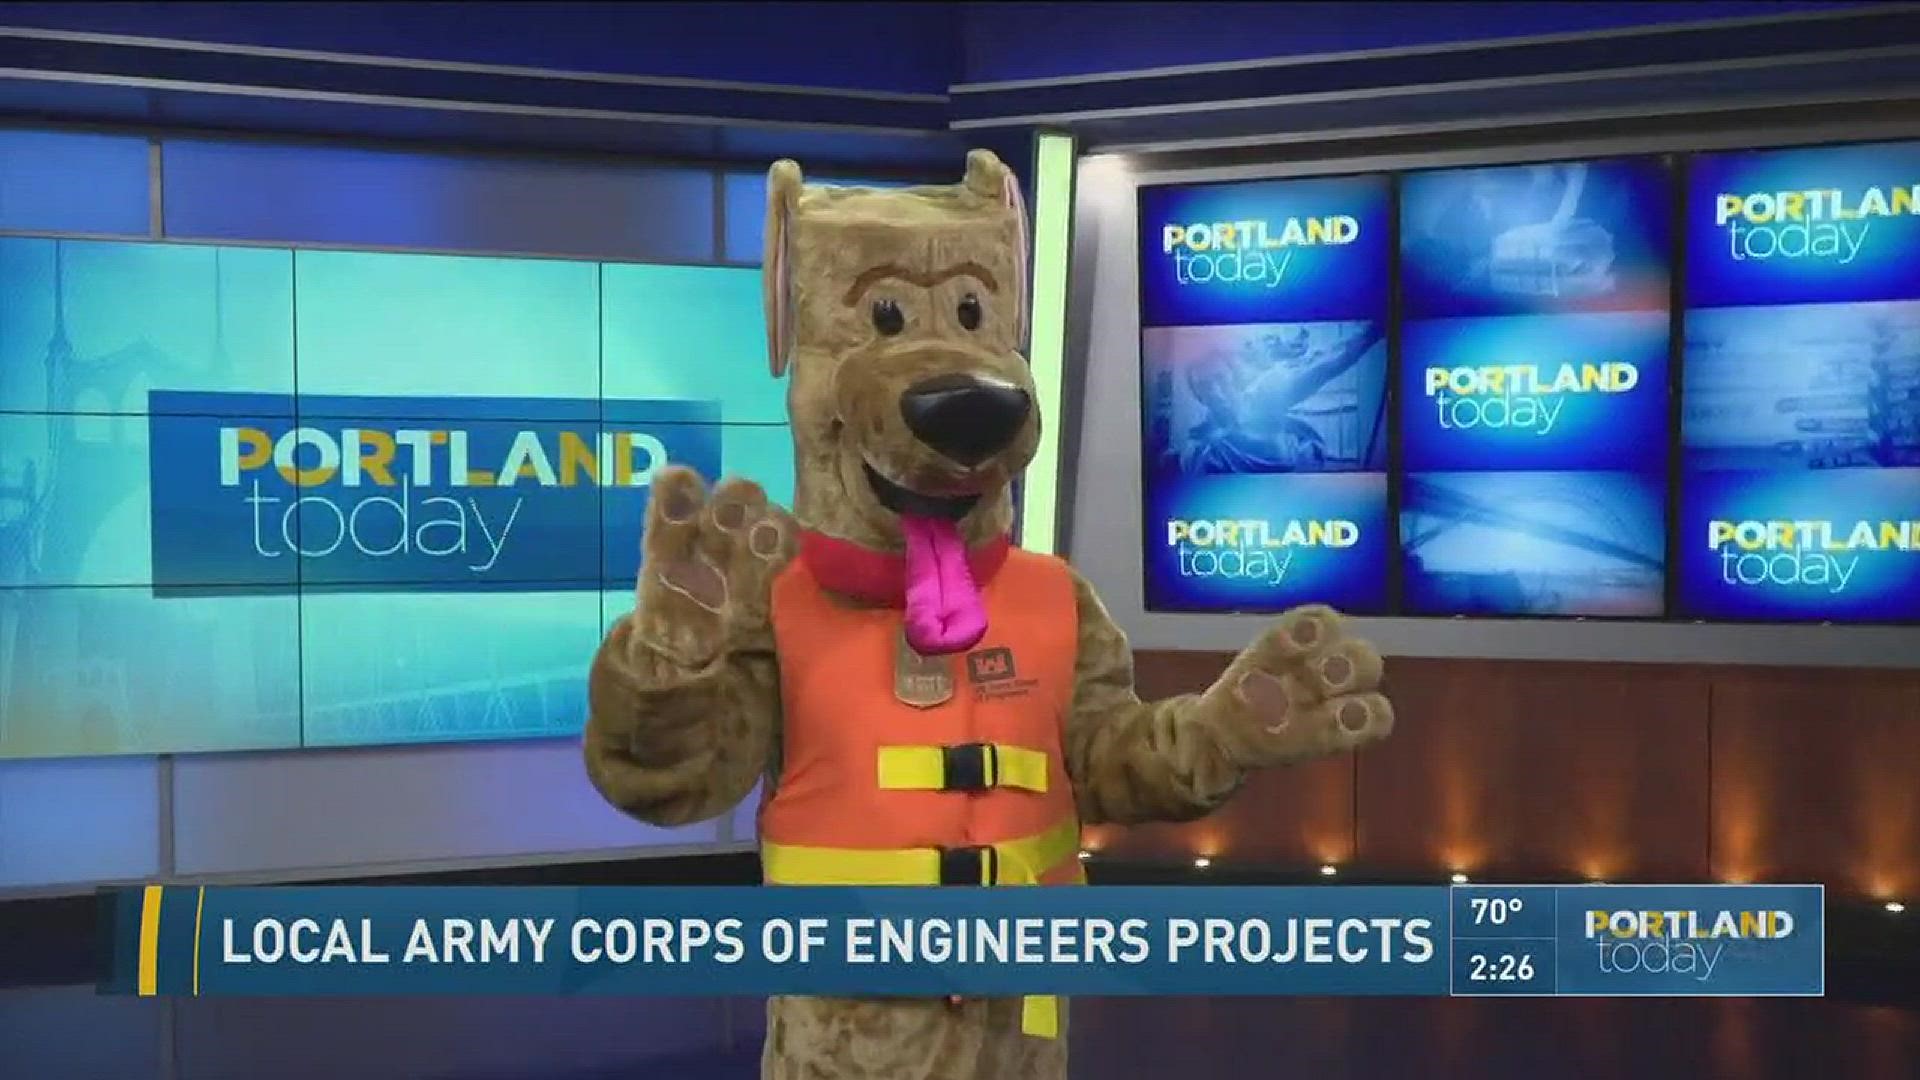 Local Army Corps of Engineers projects